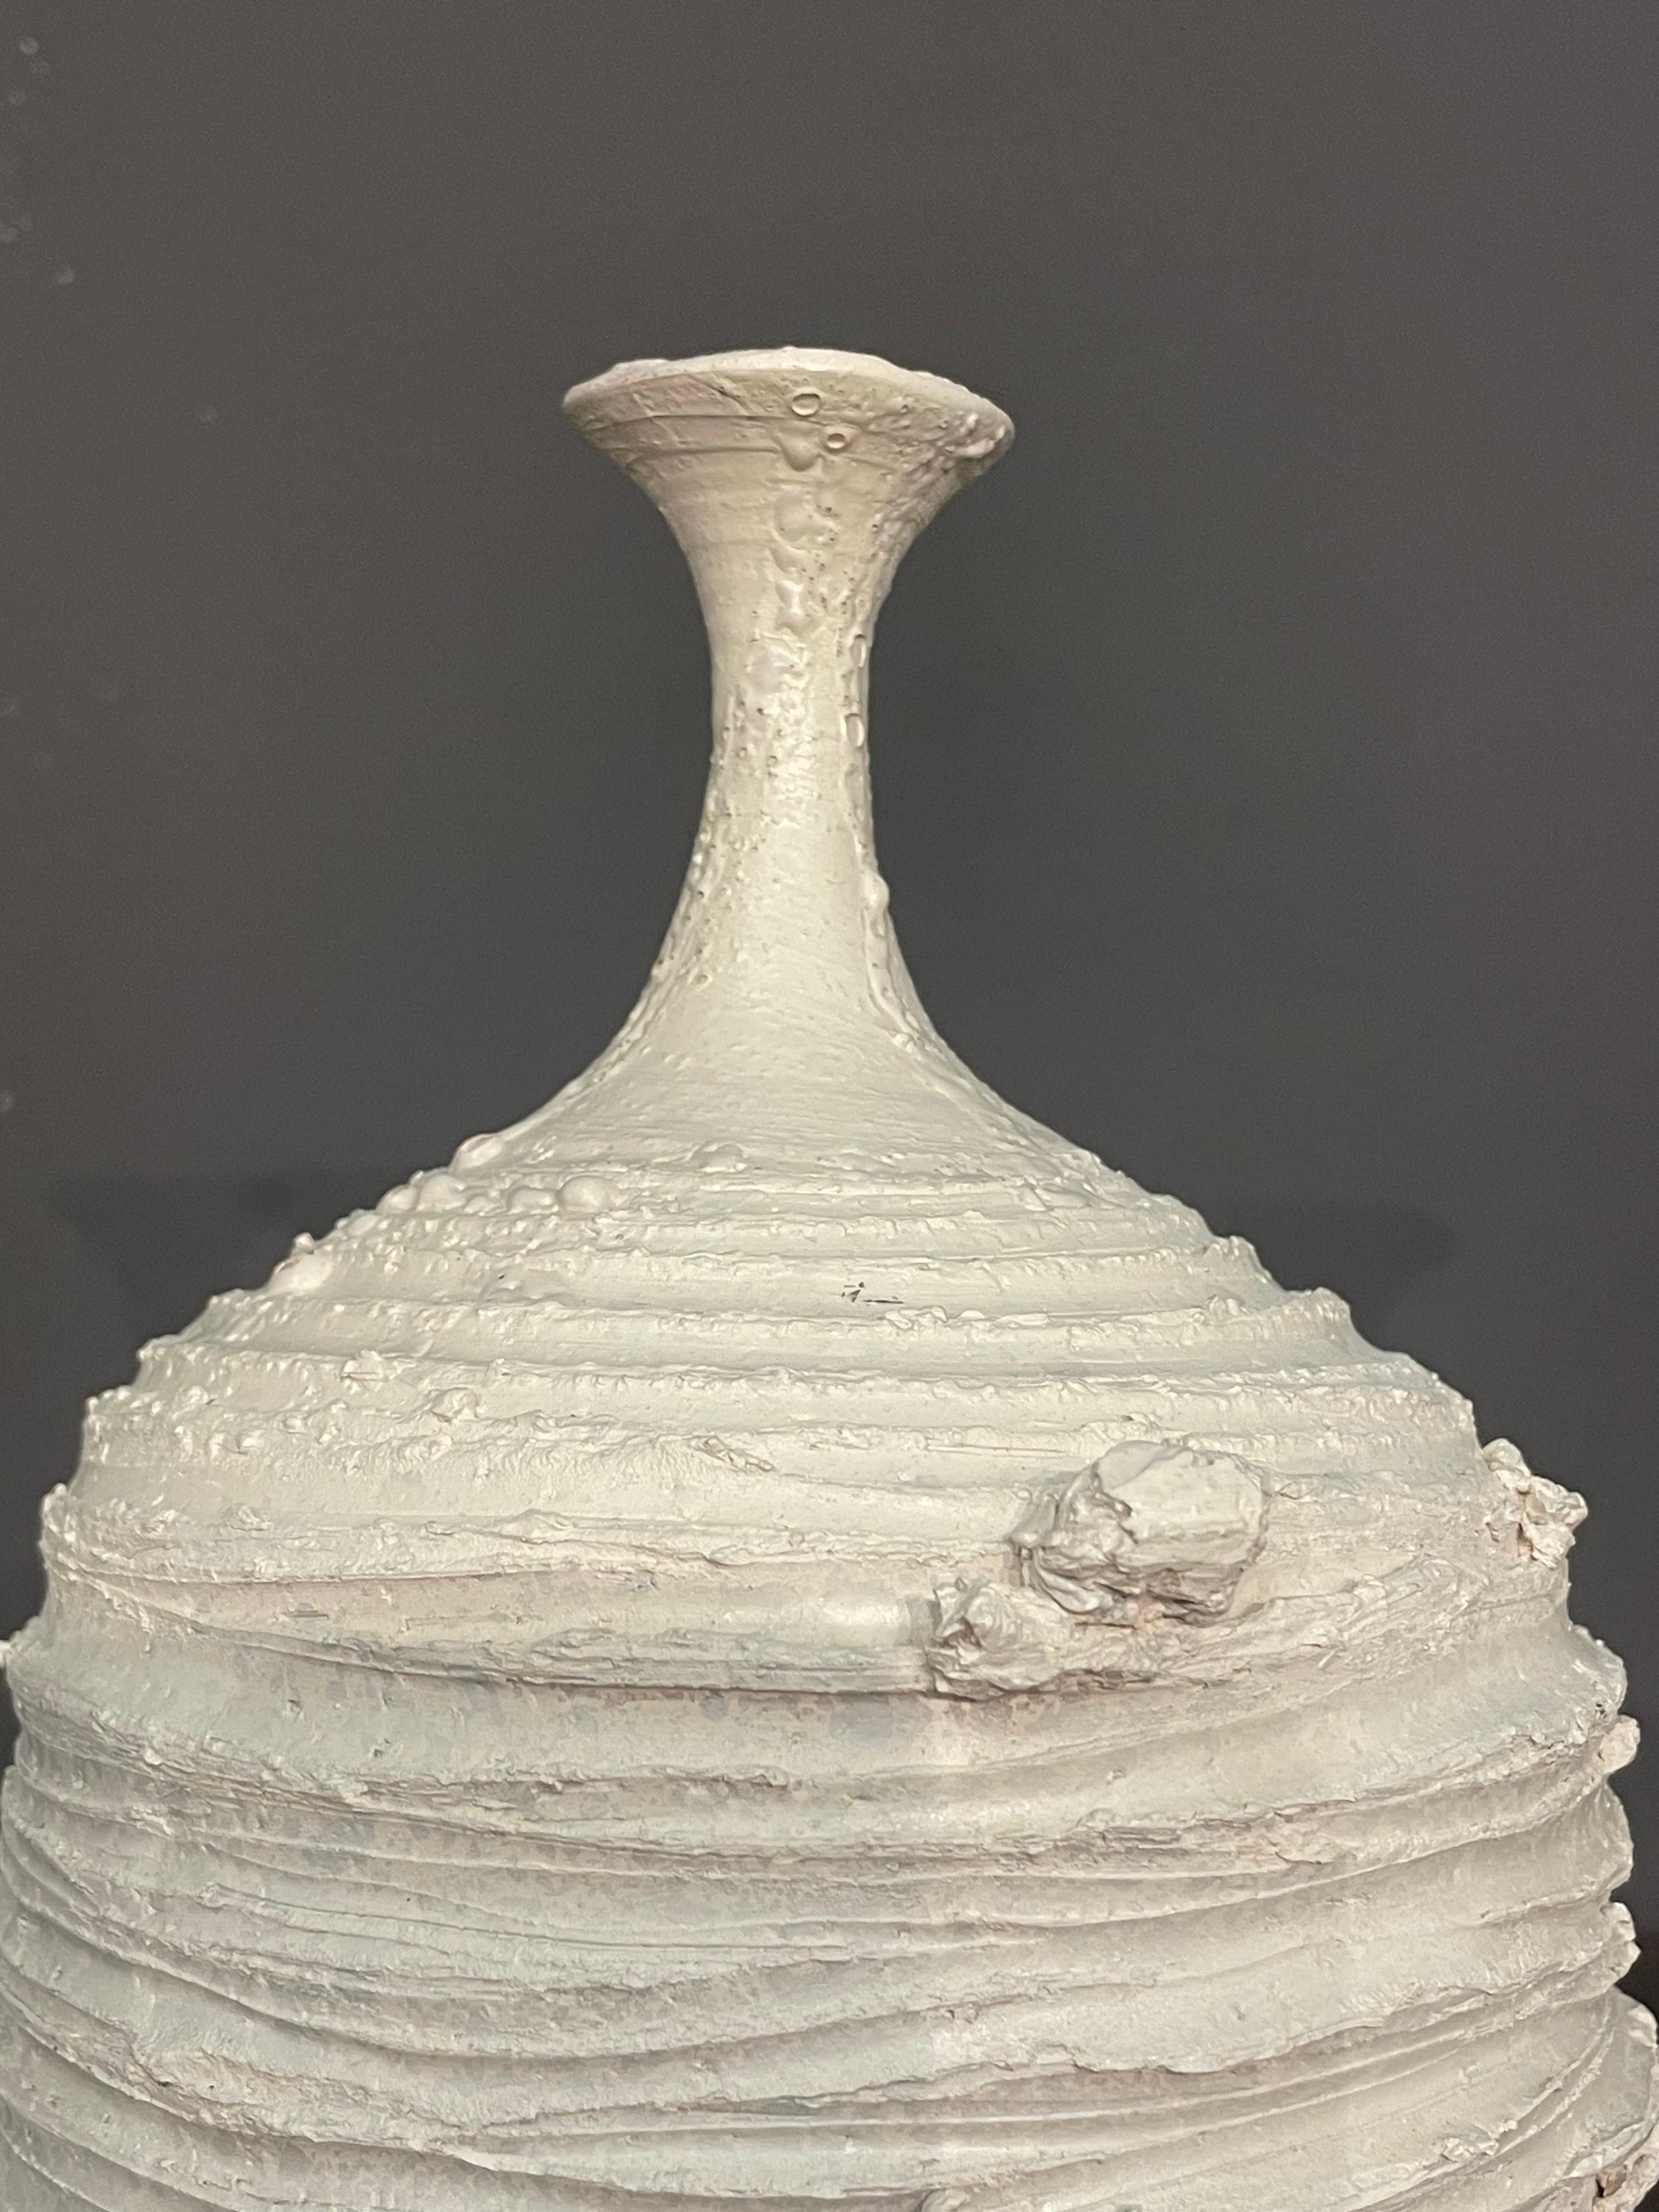 Contemporary Italian hand made Brutalist design white vase.
Smooth neck with rough horizontal ridged base.
Part of a collection of three pieces.
